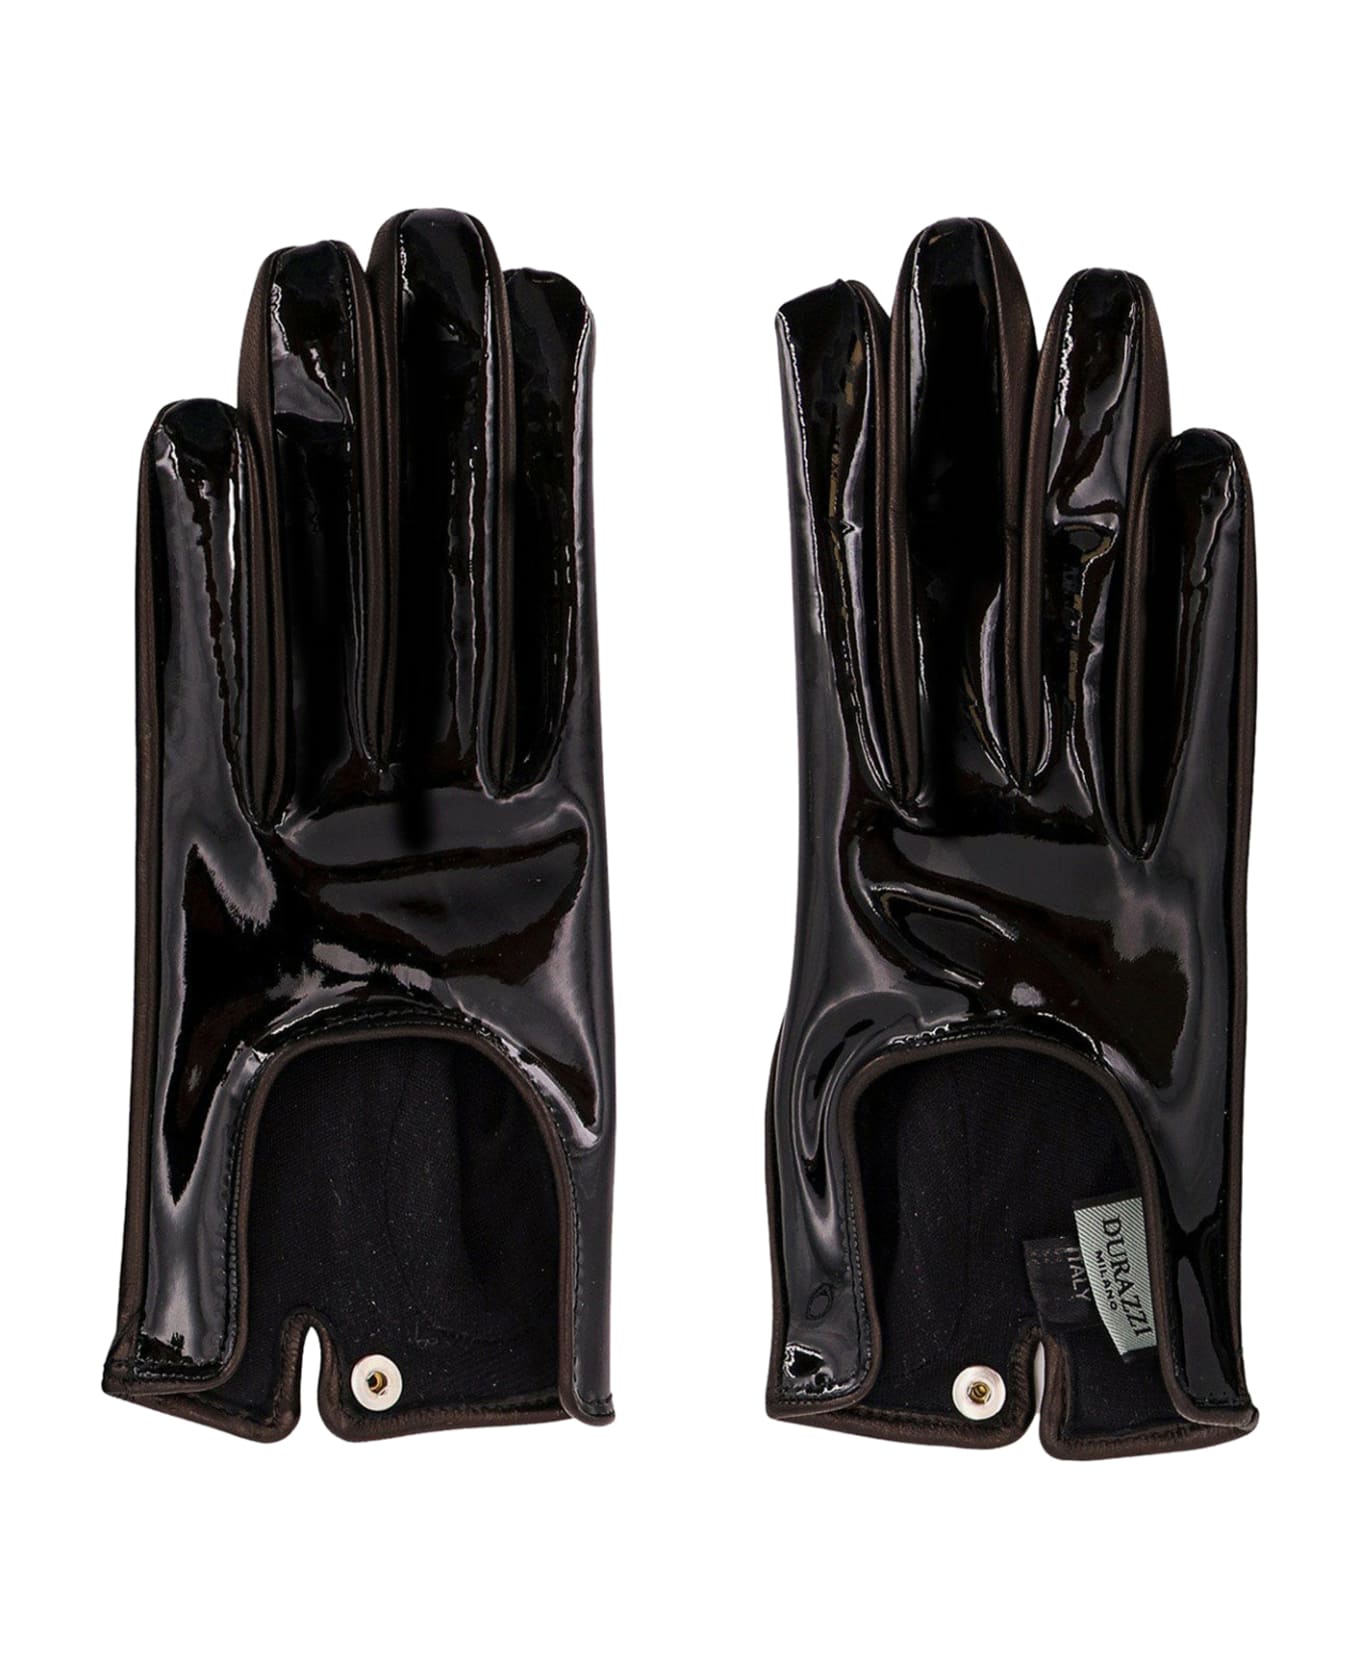 Durazzi Milano Patent And Calfskin Leather Gloves. Silk Lining - Black 手袋